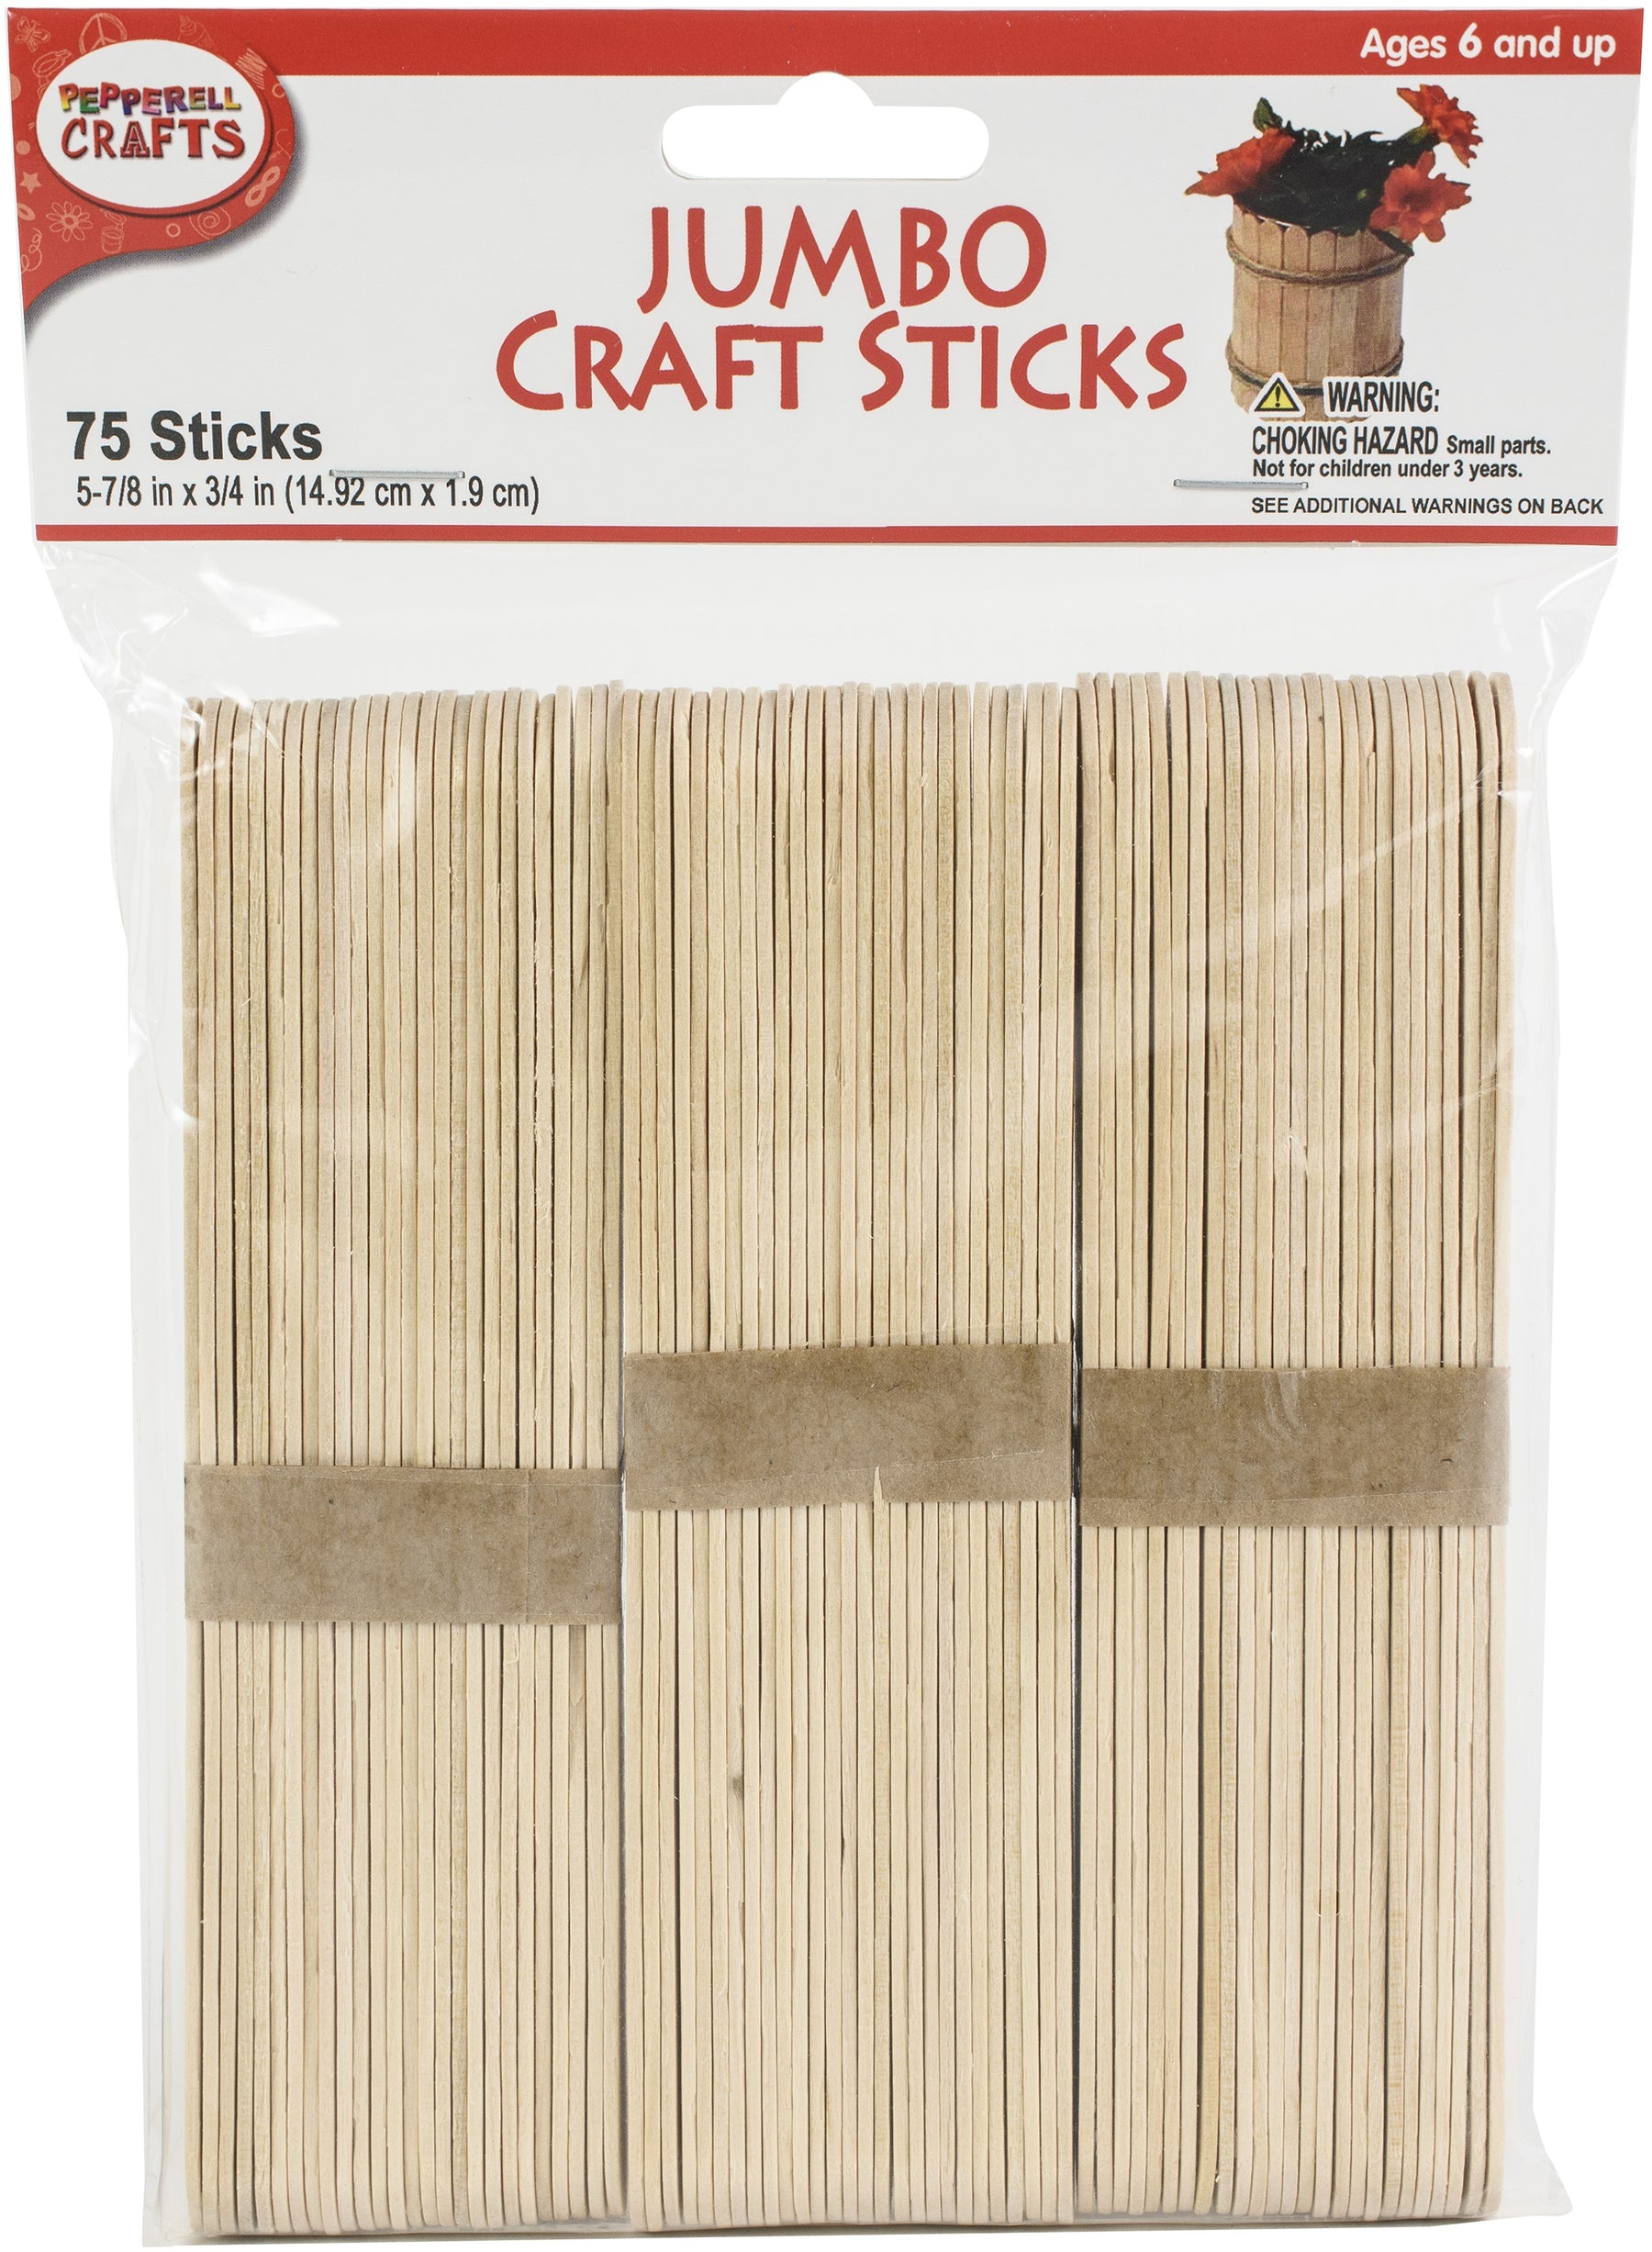 Multicraft Imports Extra Jumbo Craft Sticks 133123 for sale online